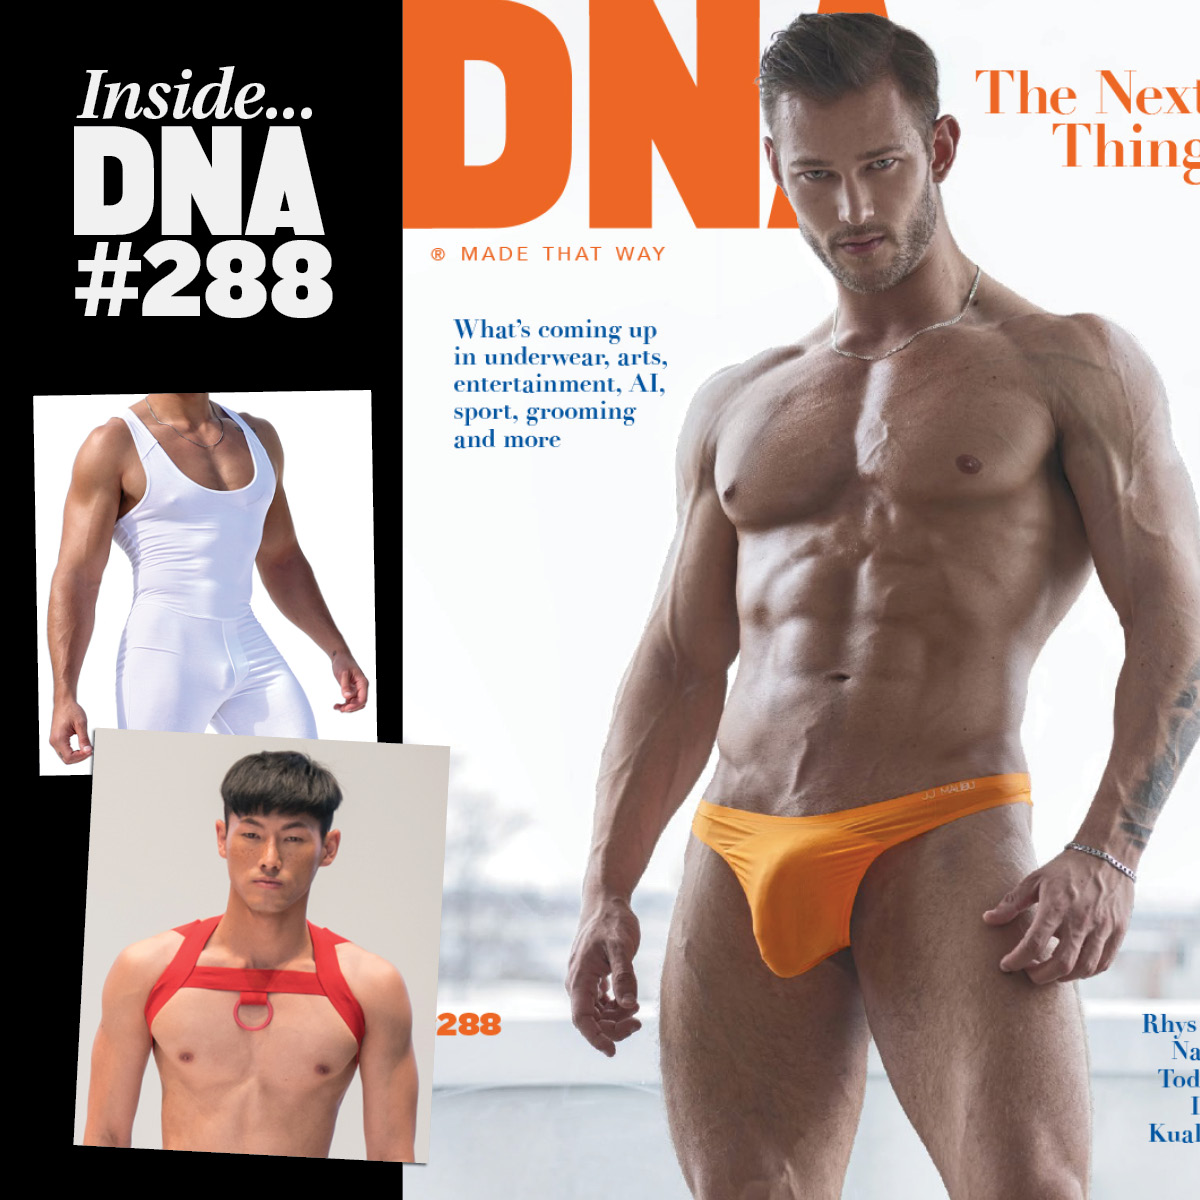 Inside DNA #288: Find The Next Big Things in fashion! Here's a teaser for the @rufskin Minimal three-quarter length bodysuit and the Andy Bandy label at Malaysian Fashion Week | dnam.ag/dna288